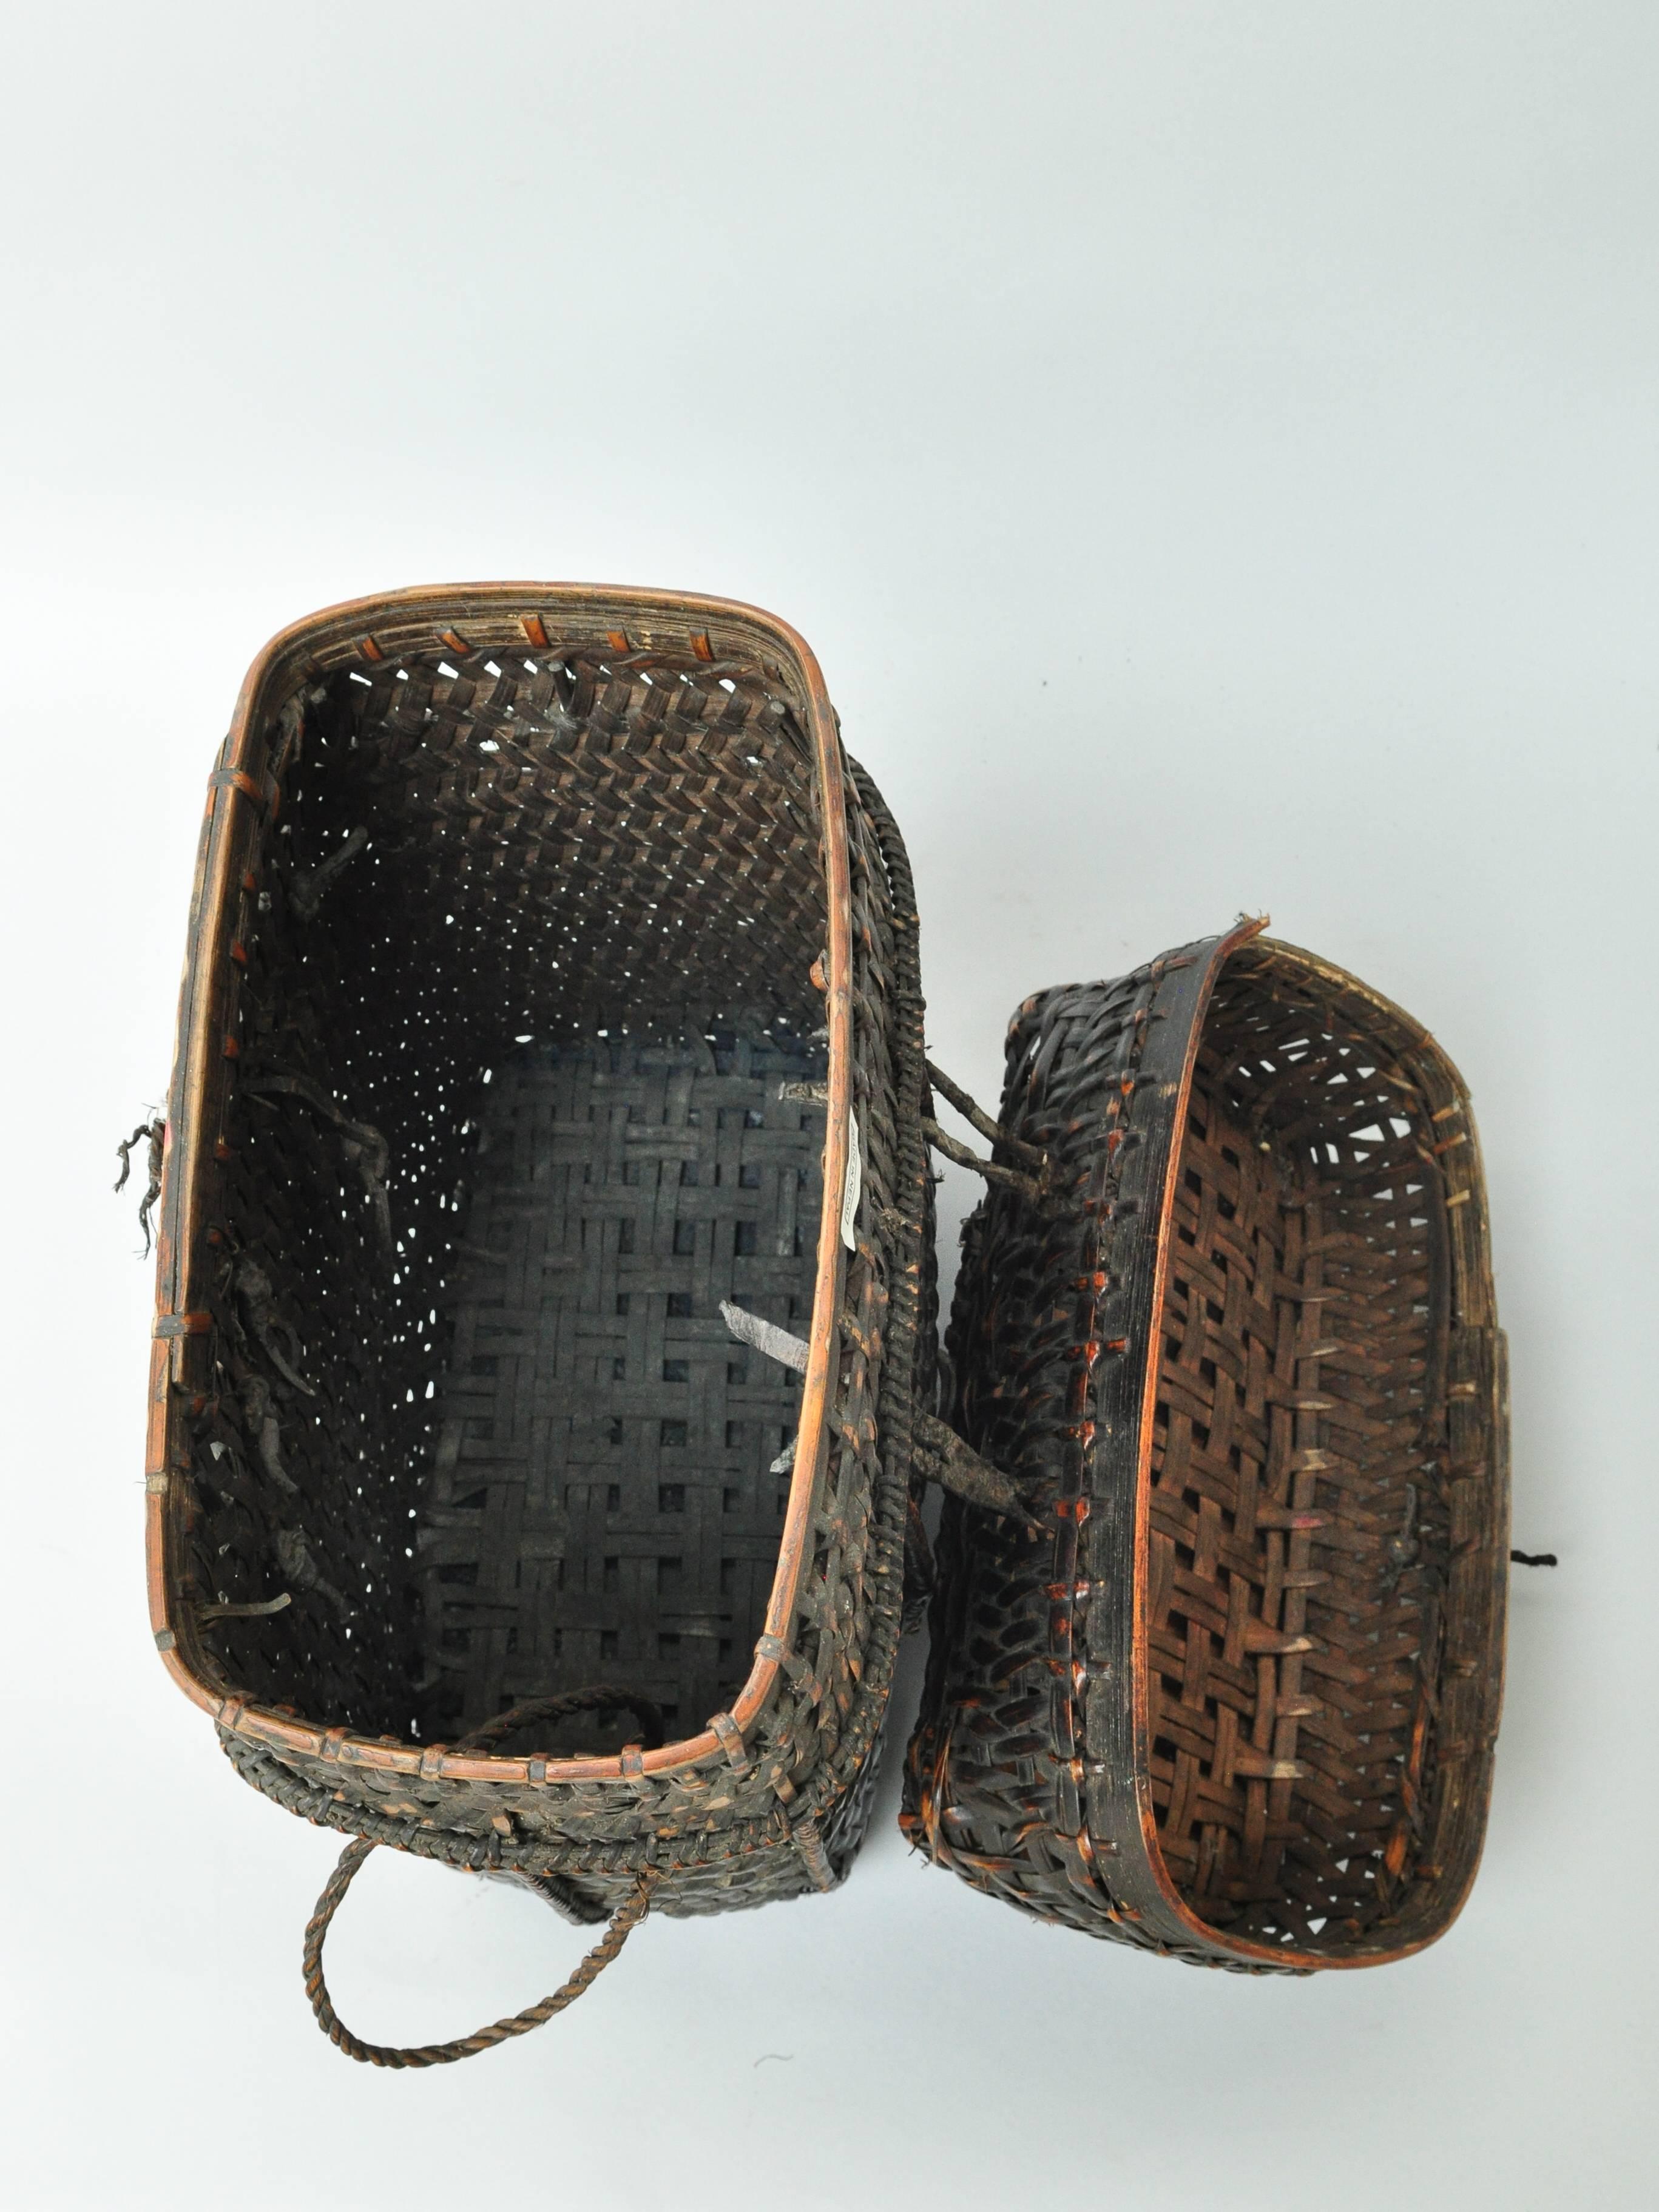 Mid-20th Century Tribal Storage and Carrying Basket with Lid from Bhutan, Mid-Late 20th Century